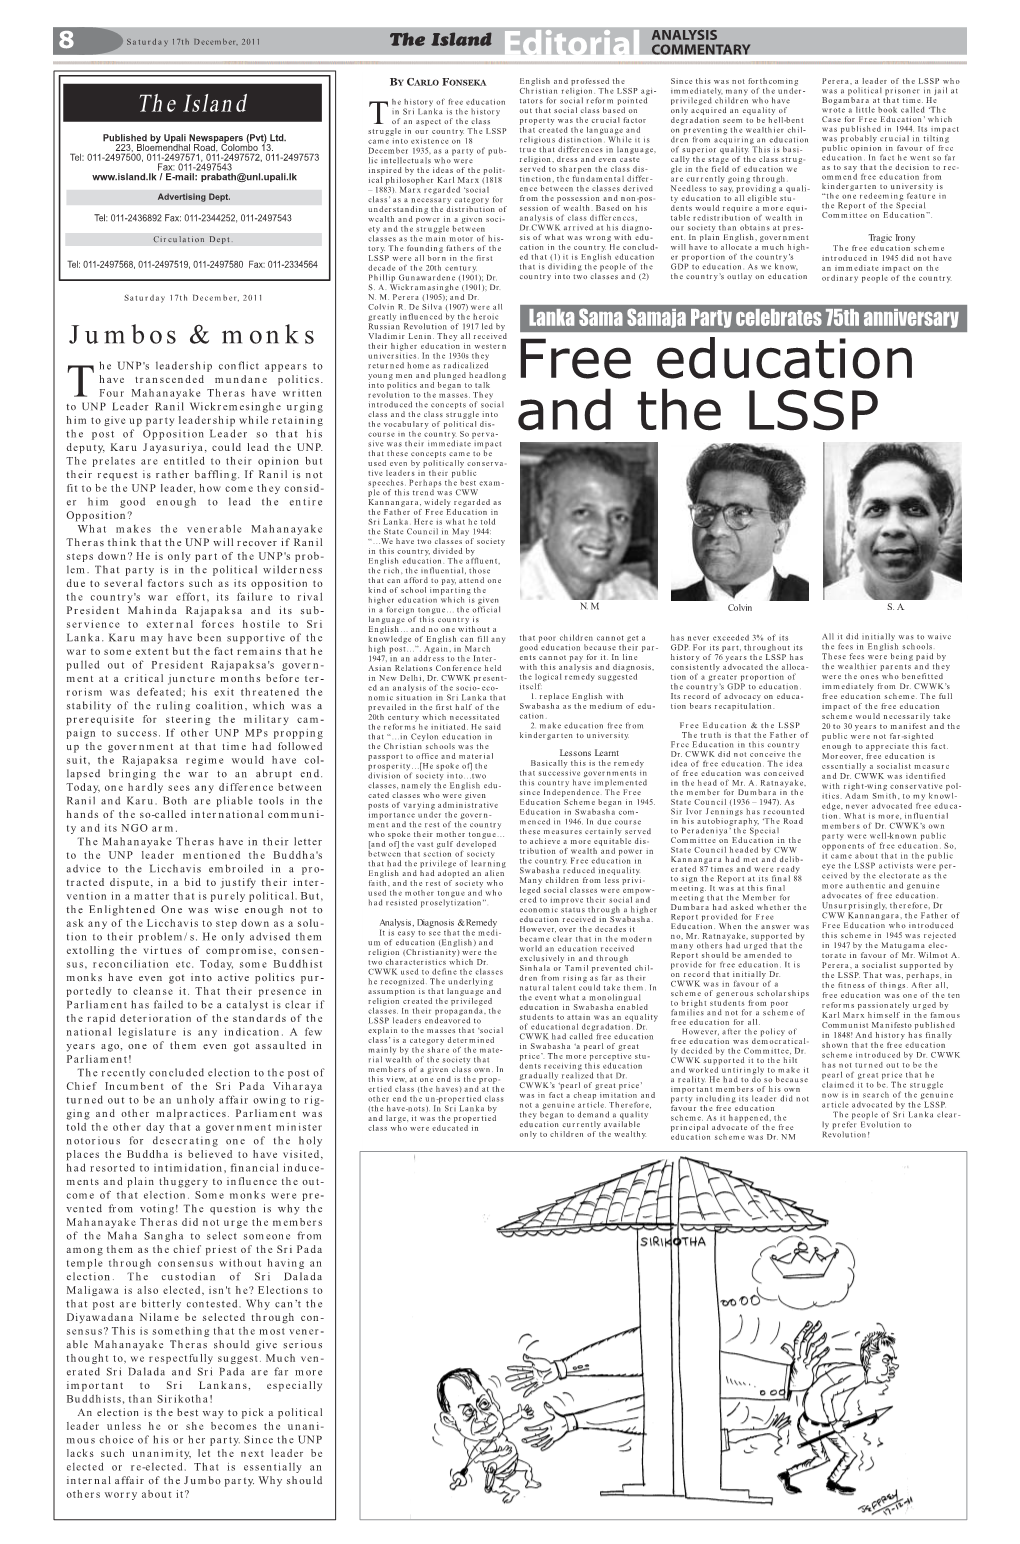 Free Education and the LSSP